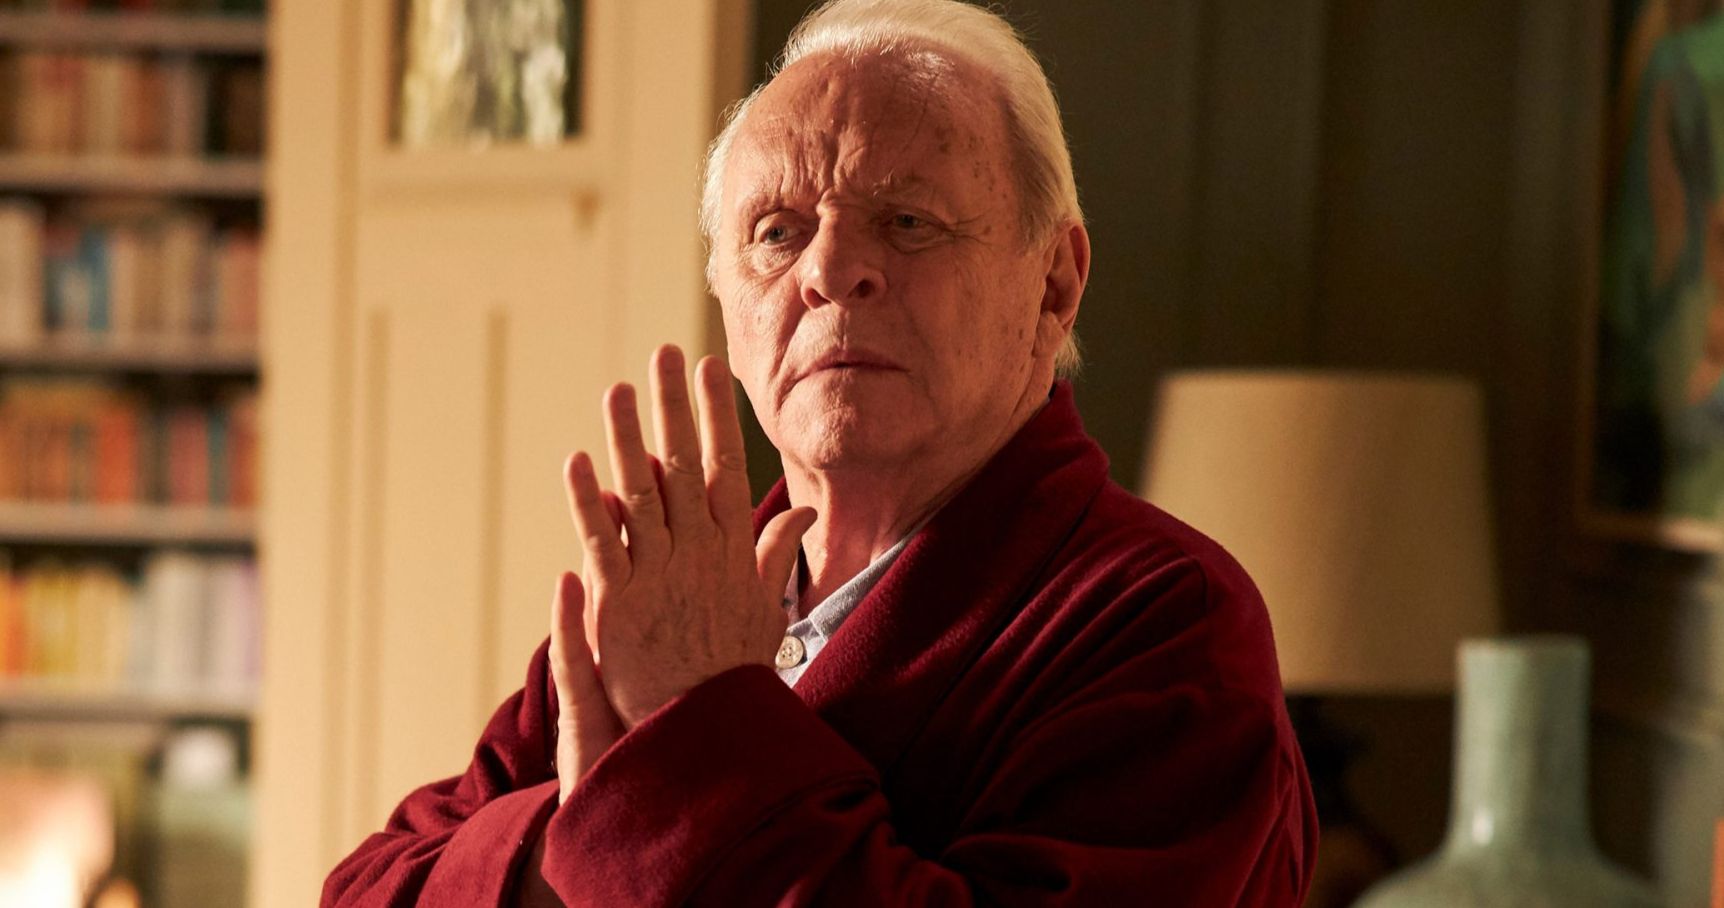 Anthony Hopkins Is Now the Oldest Actor Ever to Win an Oscar at 83